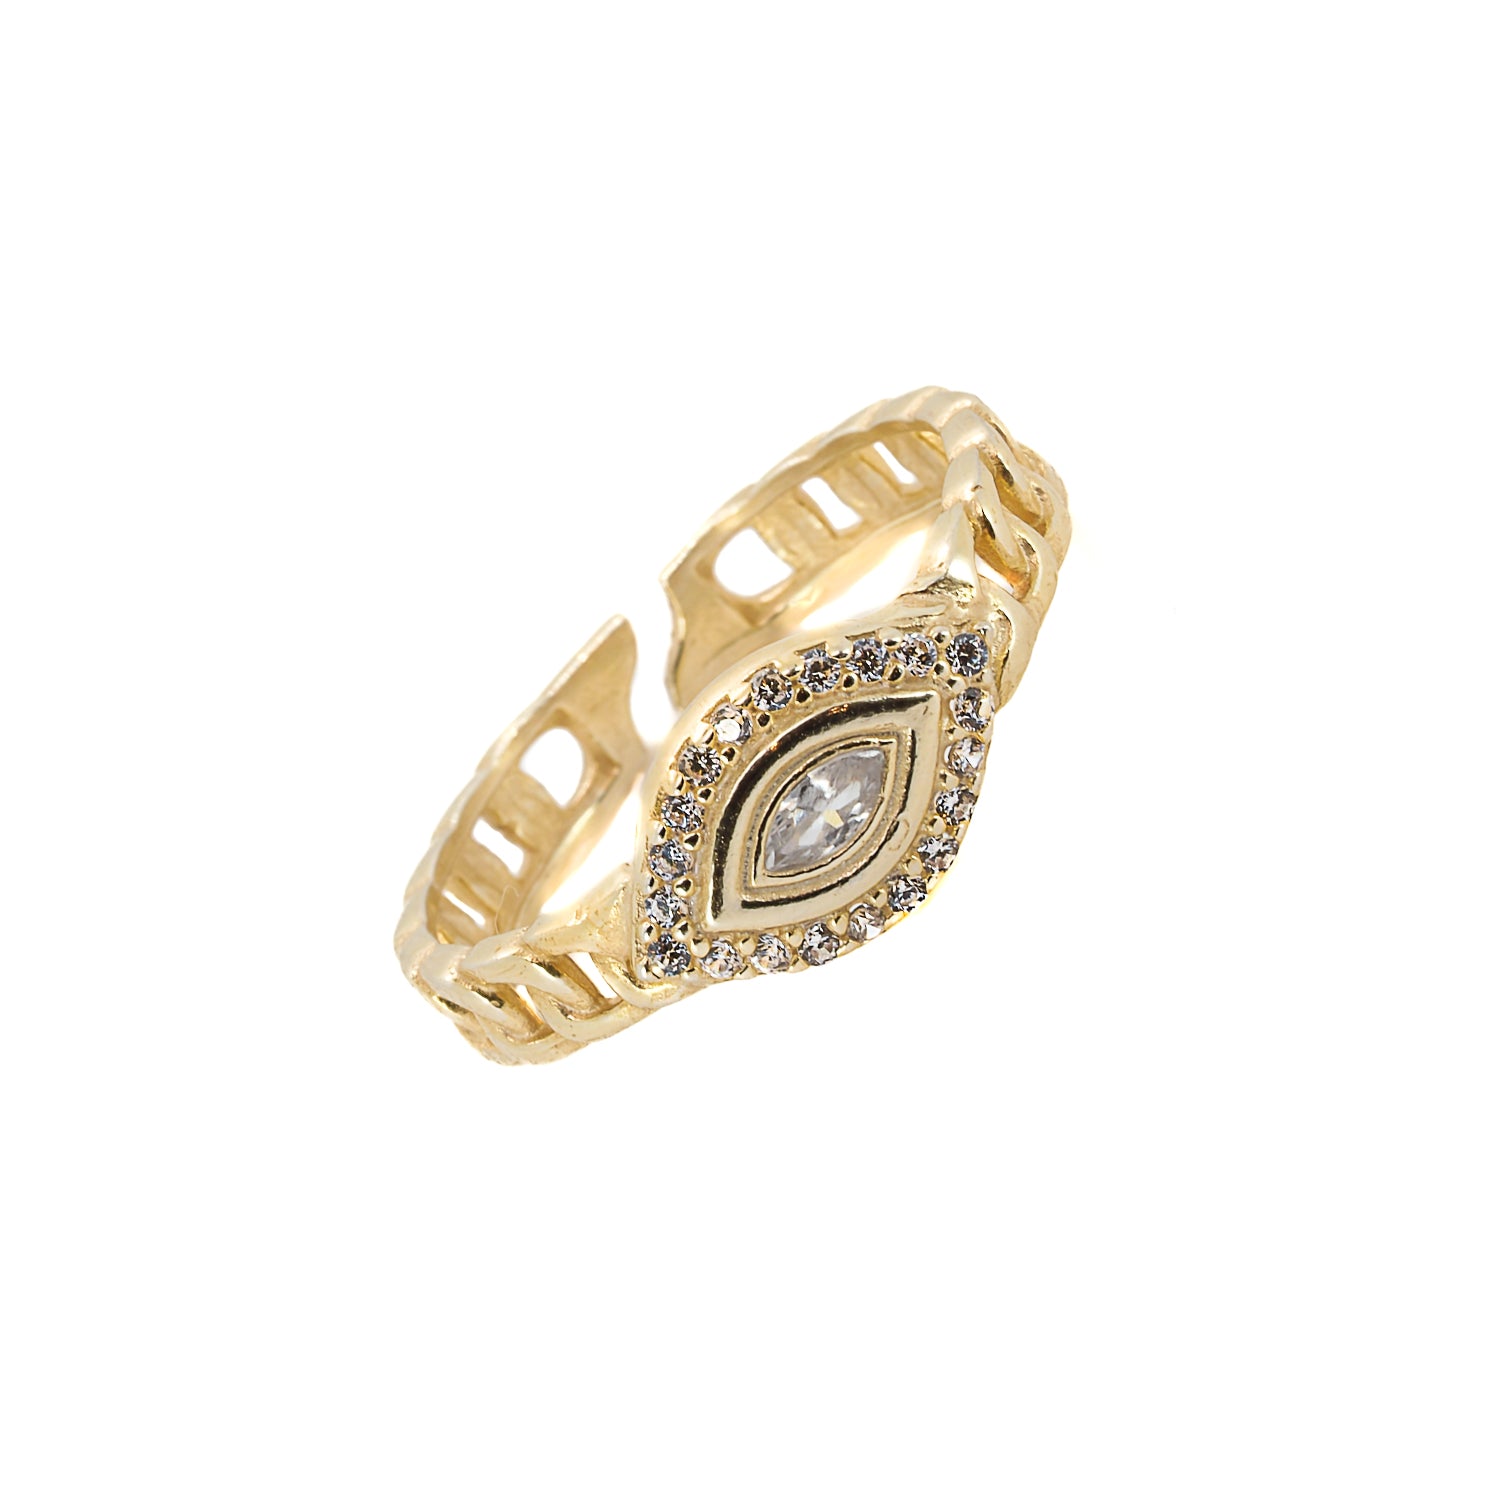 Handcrafted Evil Eye Gold Ring - Protection & Sophistication